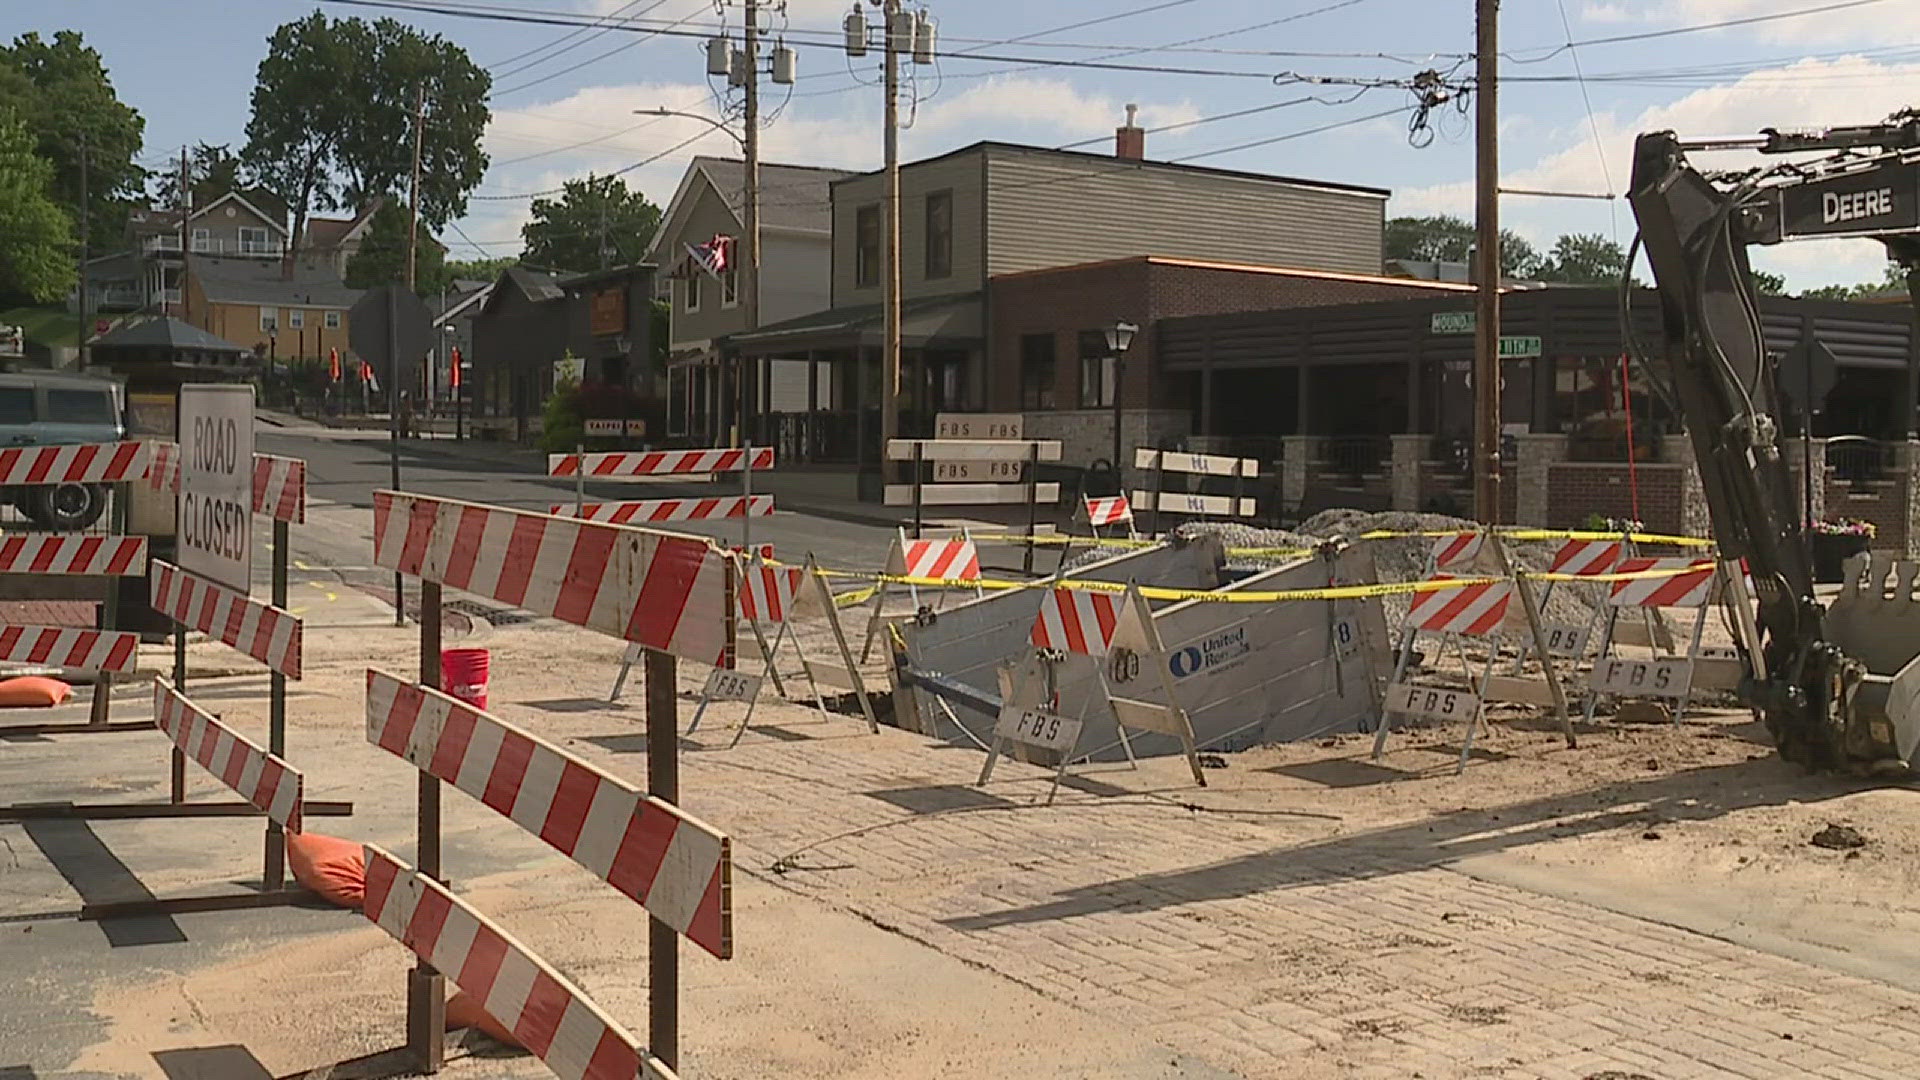 The intersection of 11th and Mound is blocked due to repairs expected to be completed next week. It adds a hurdle for people to access businesses in the area.